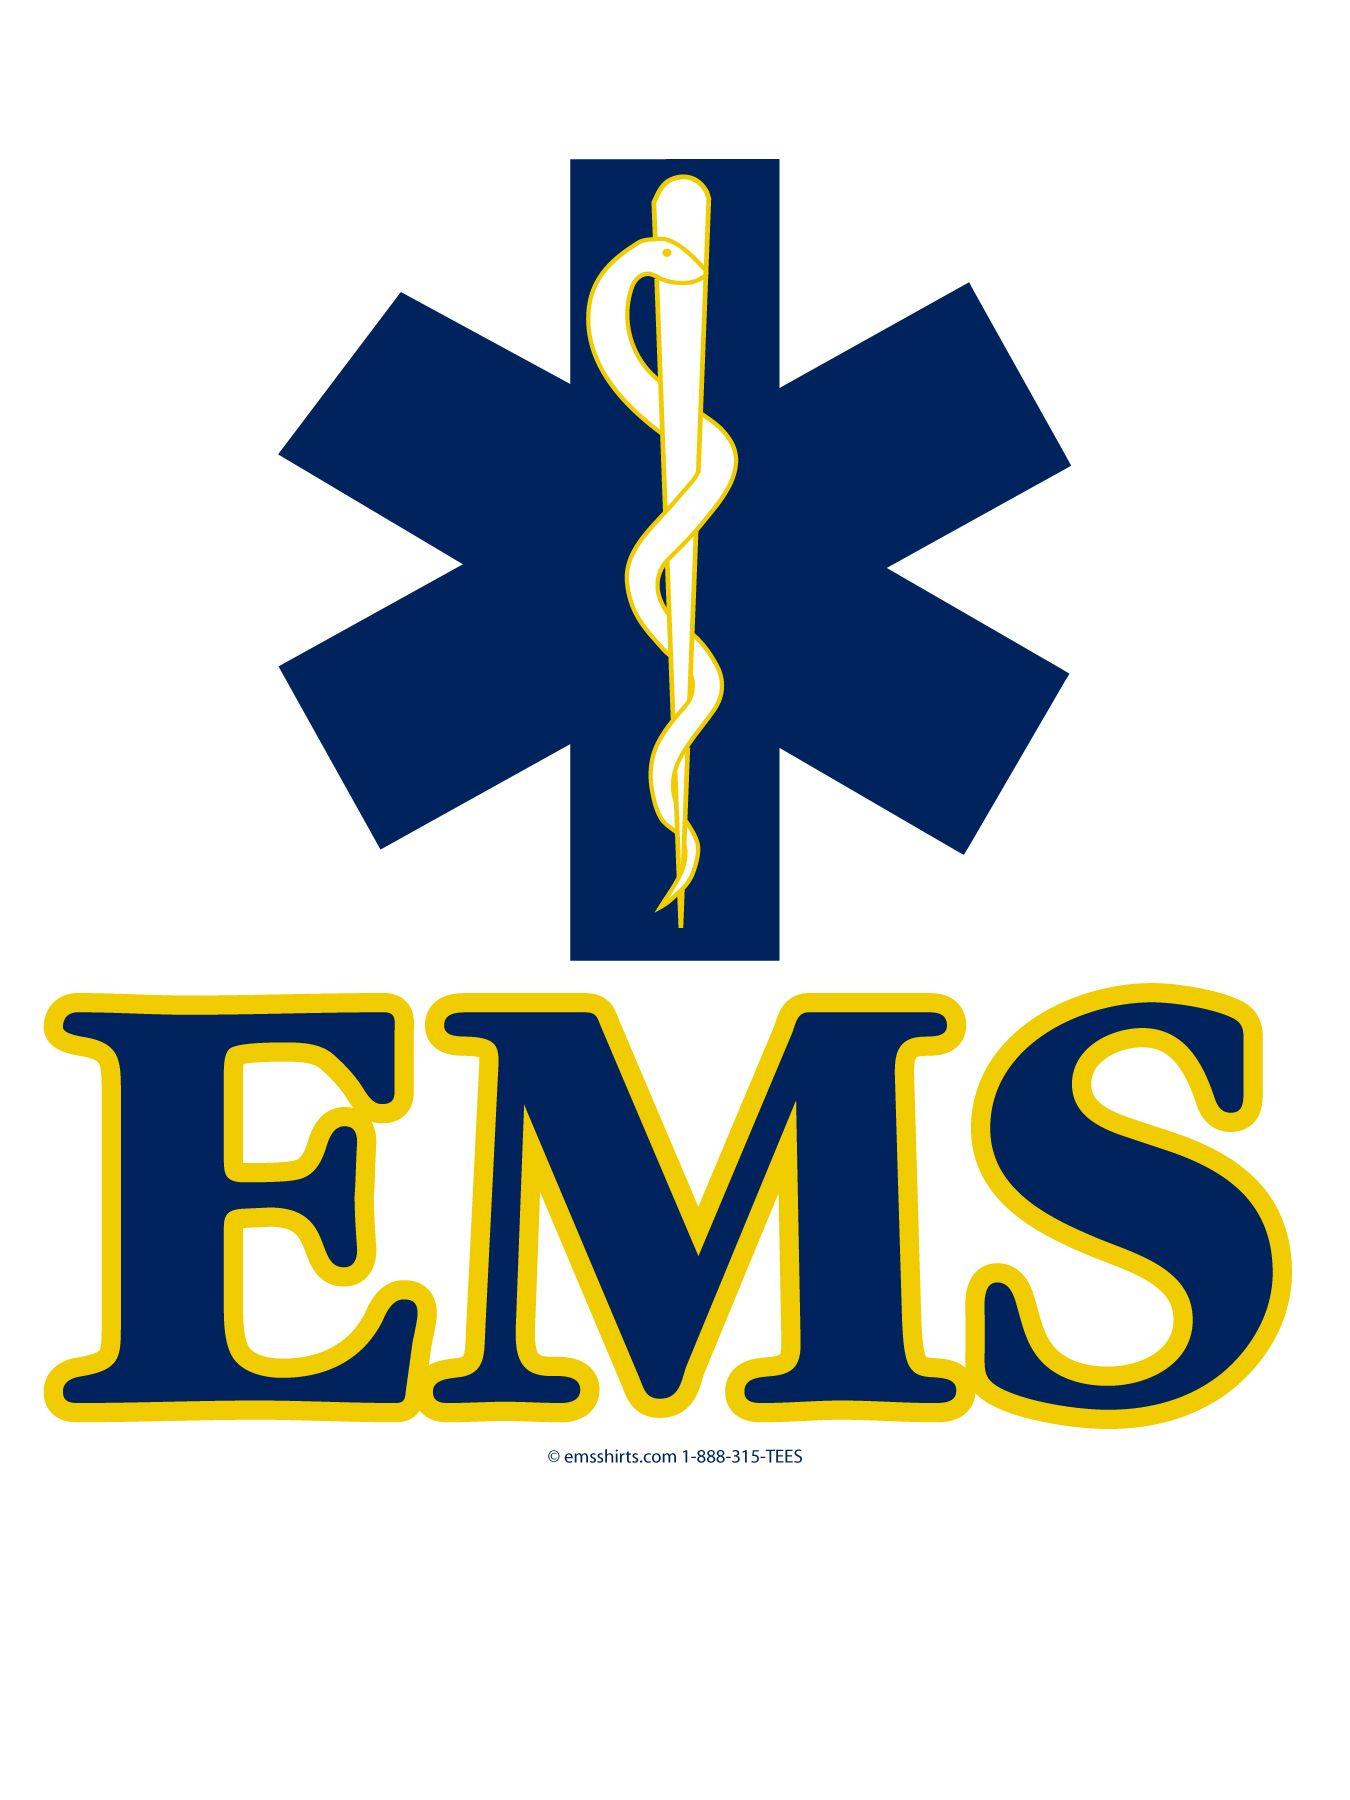 EMS Logo - Free EMS Cliparts, Download Free Clip Art, Free Clip Art on Clipart ...